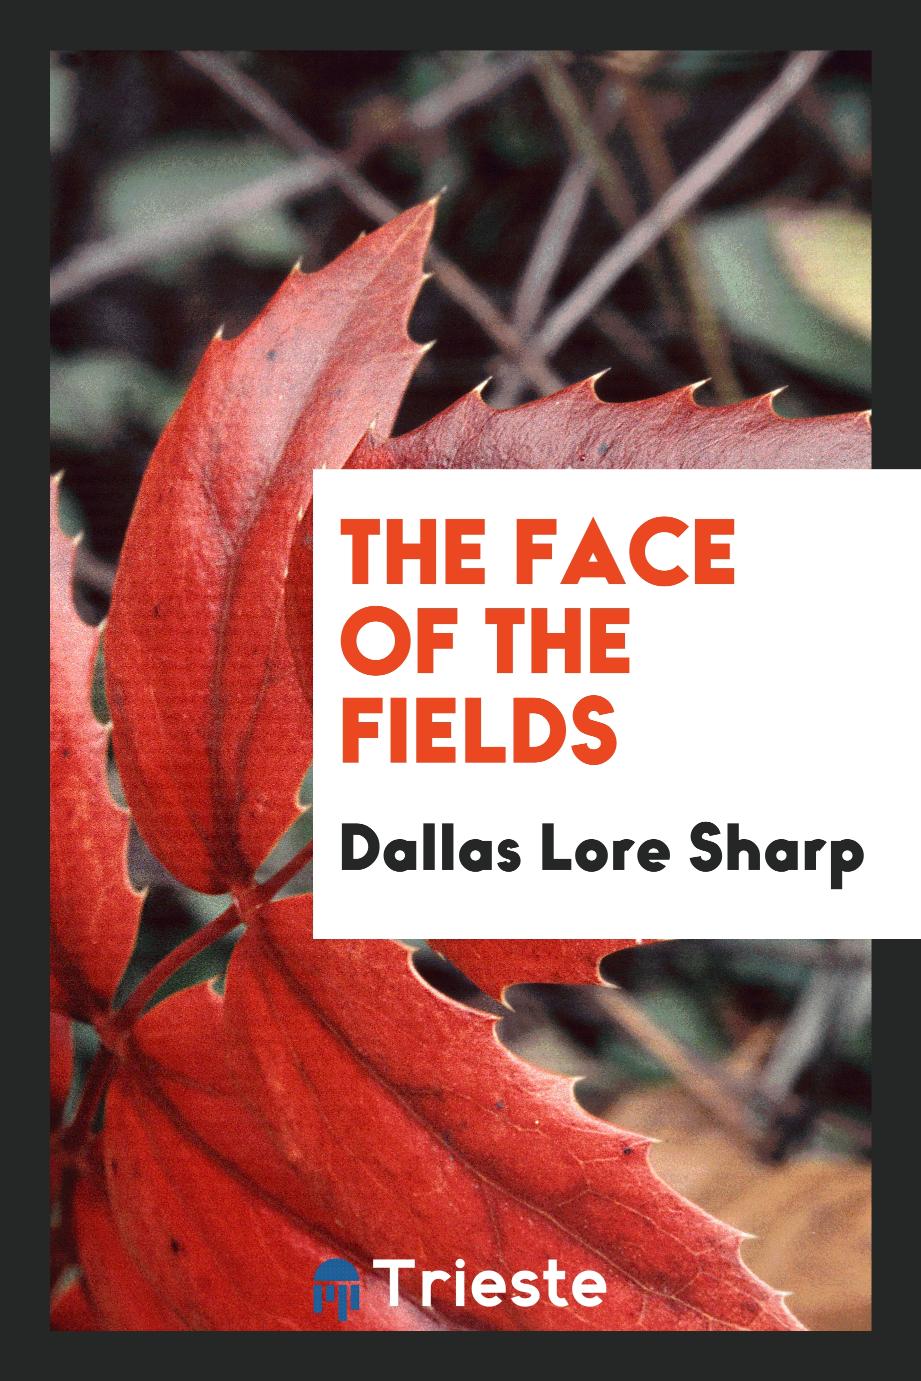 The face of the fields